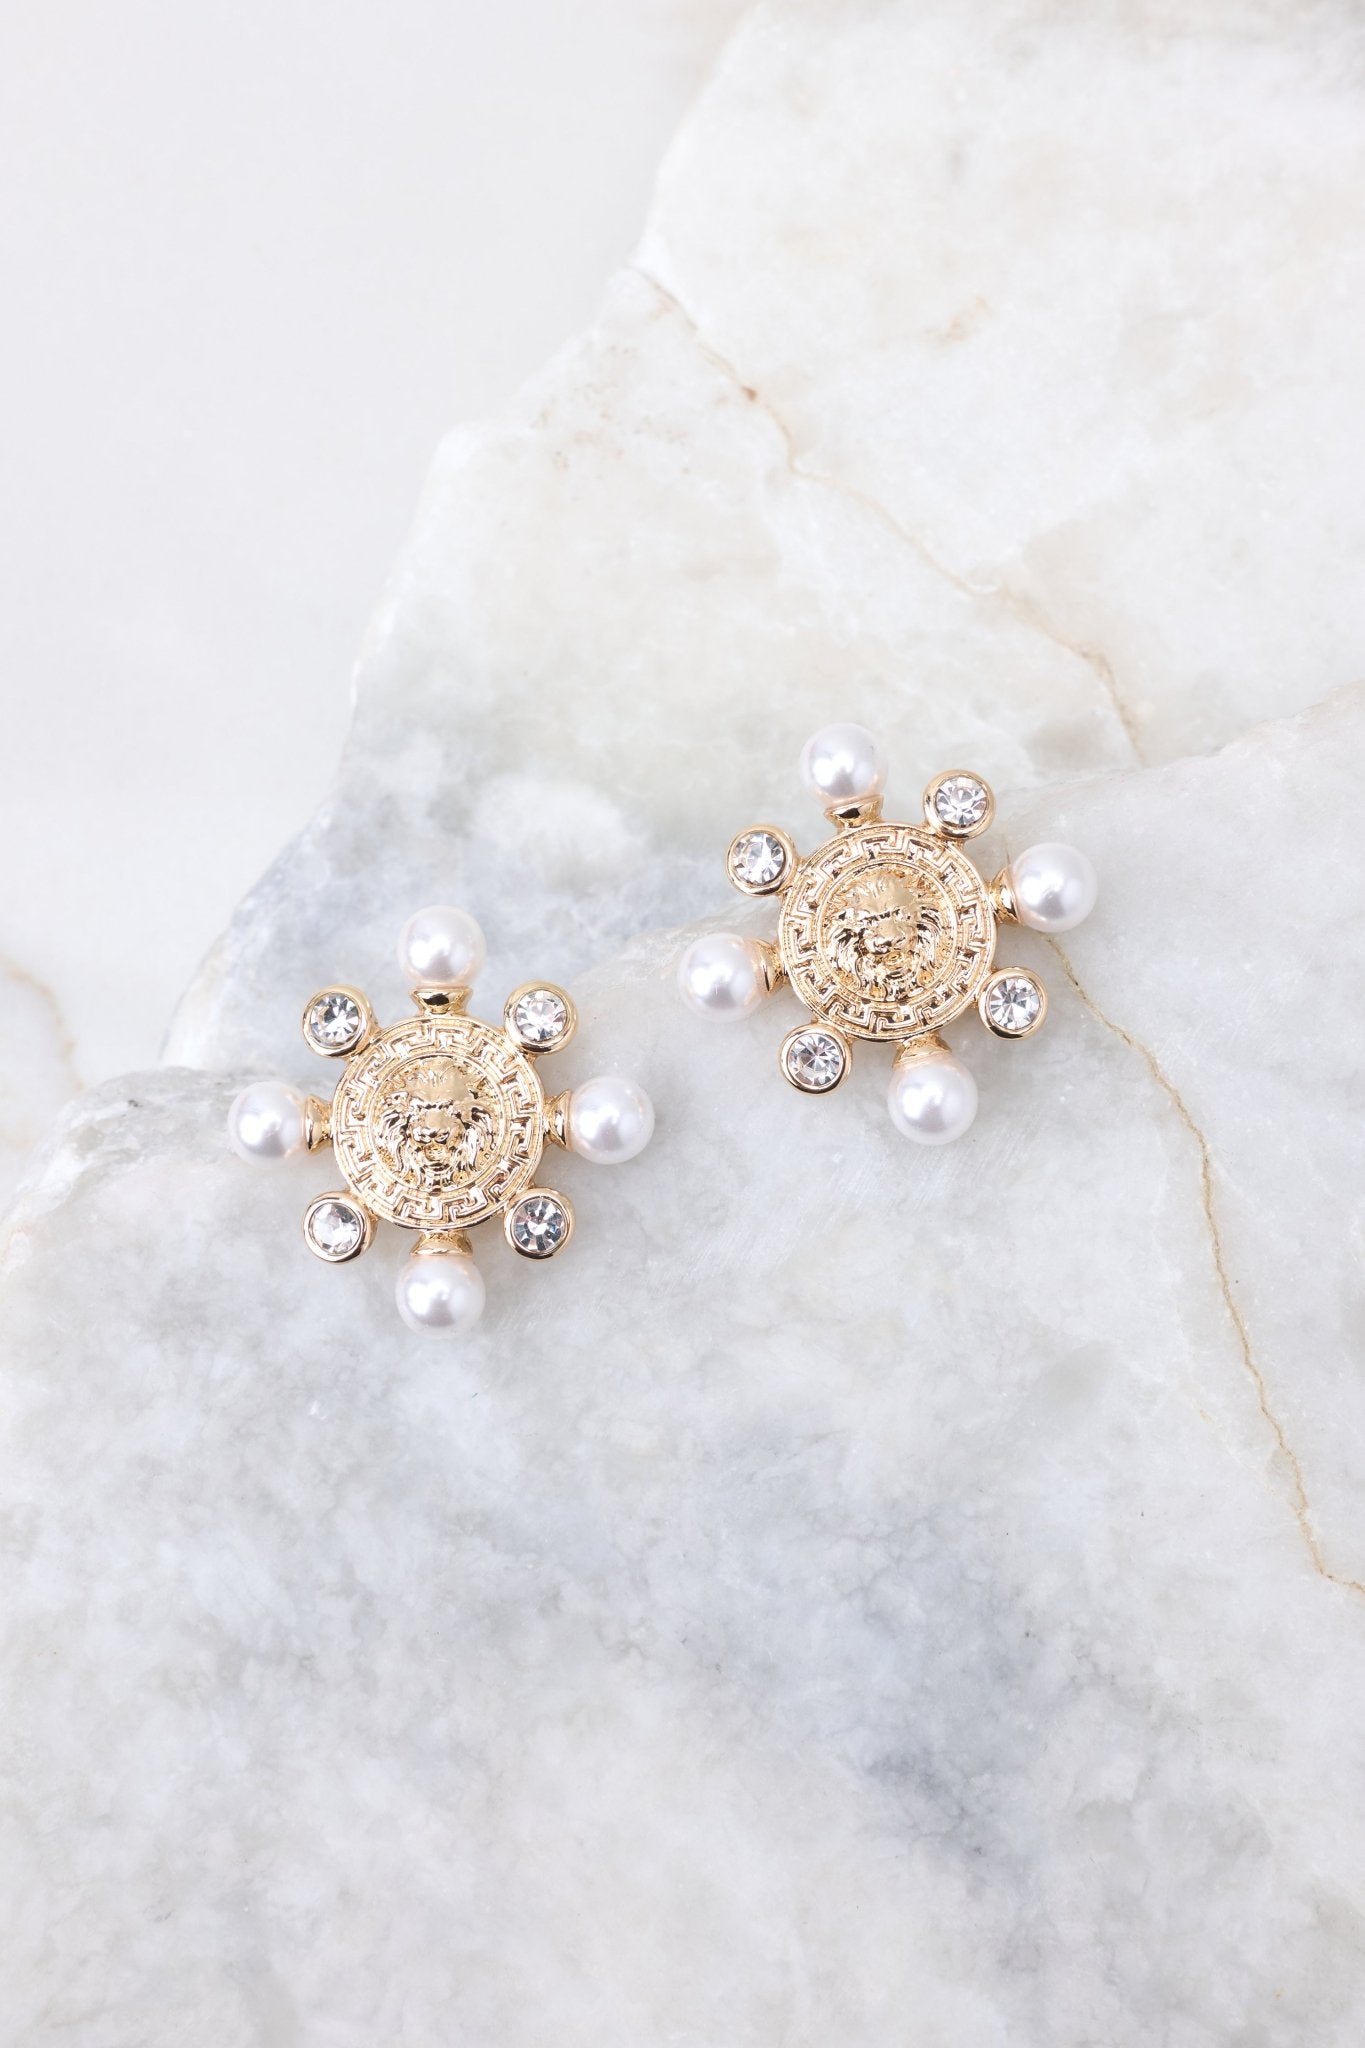 Overhead view of these earrings that feature a circle lion head design, small pearls and rhinestones along the edge, and a secure post backing.